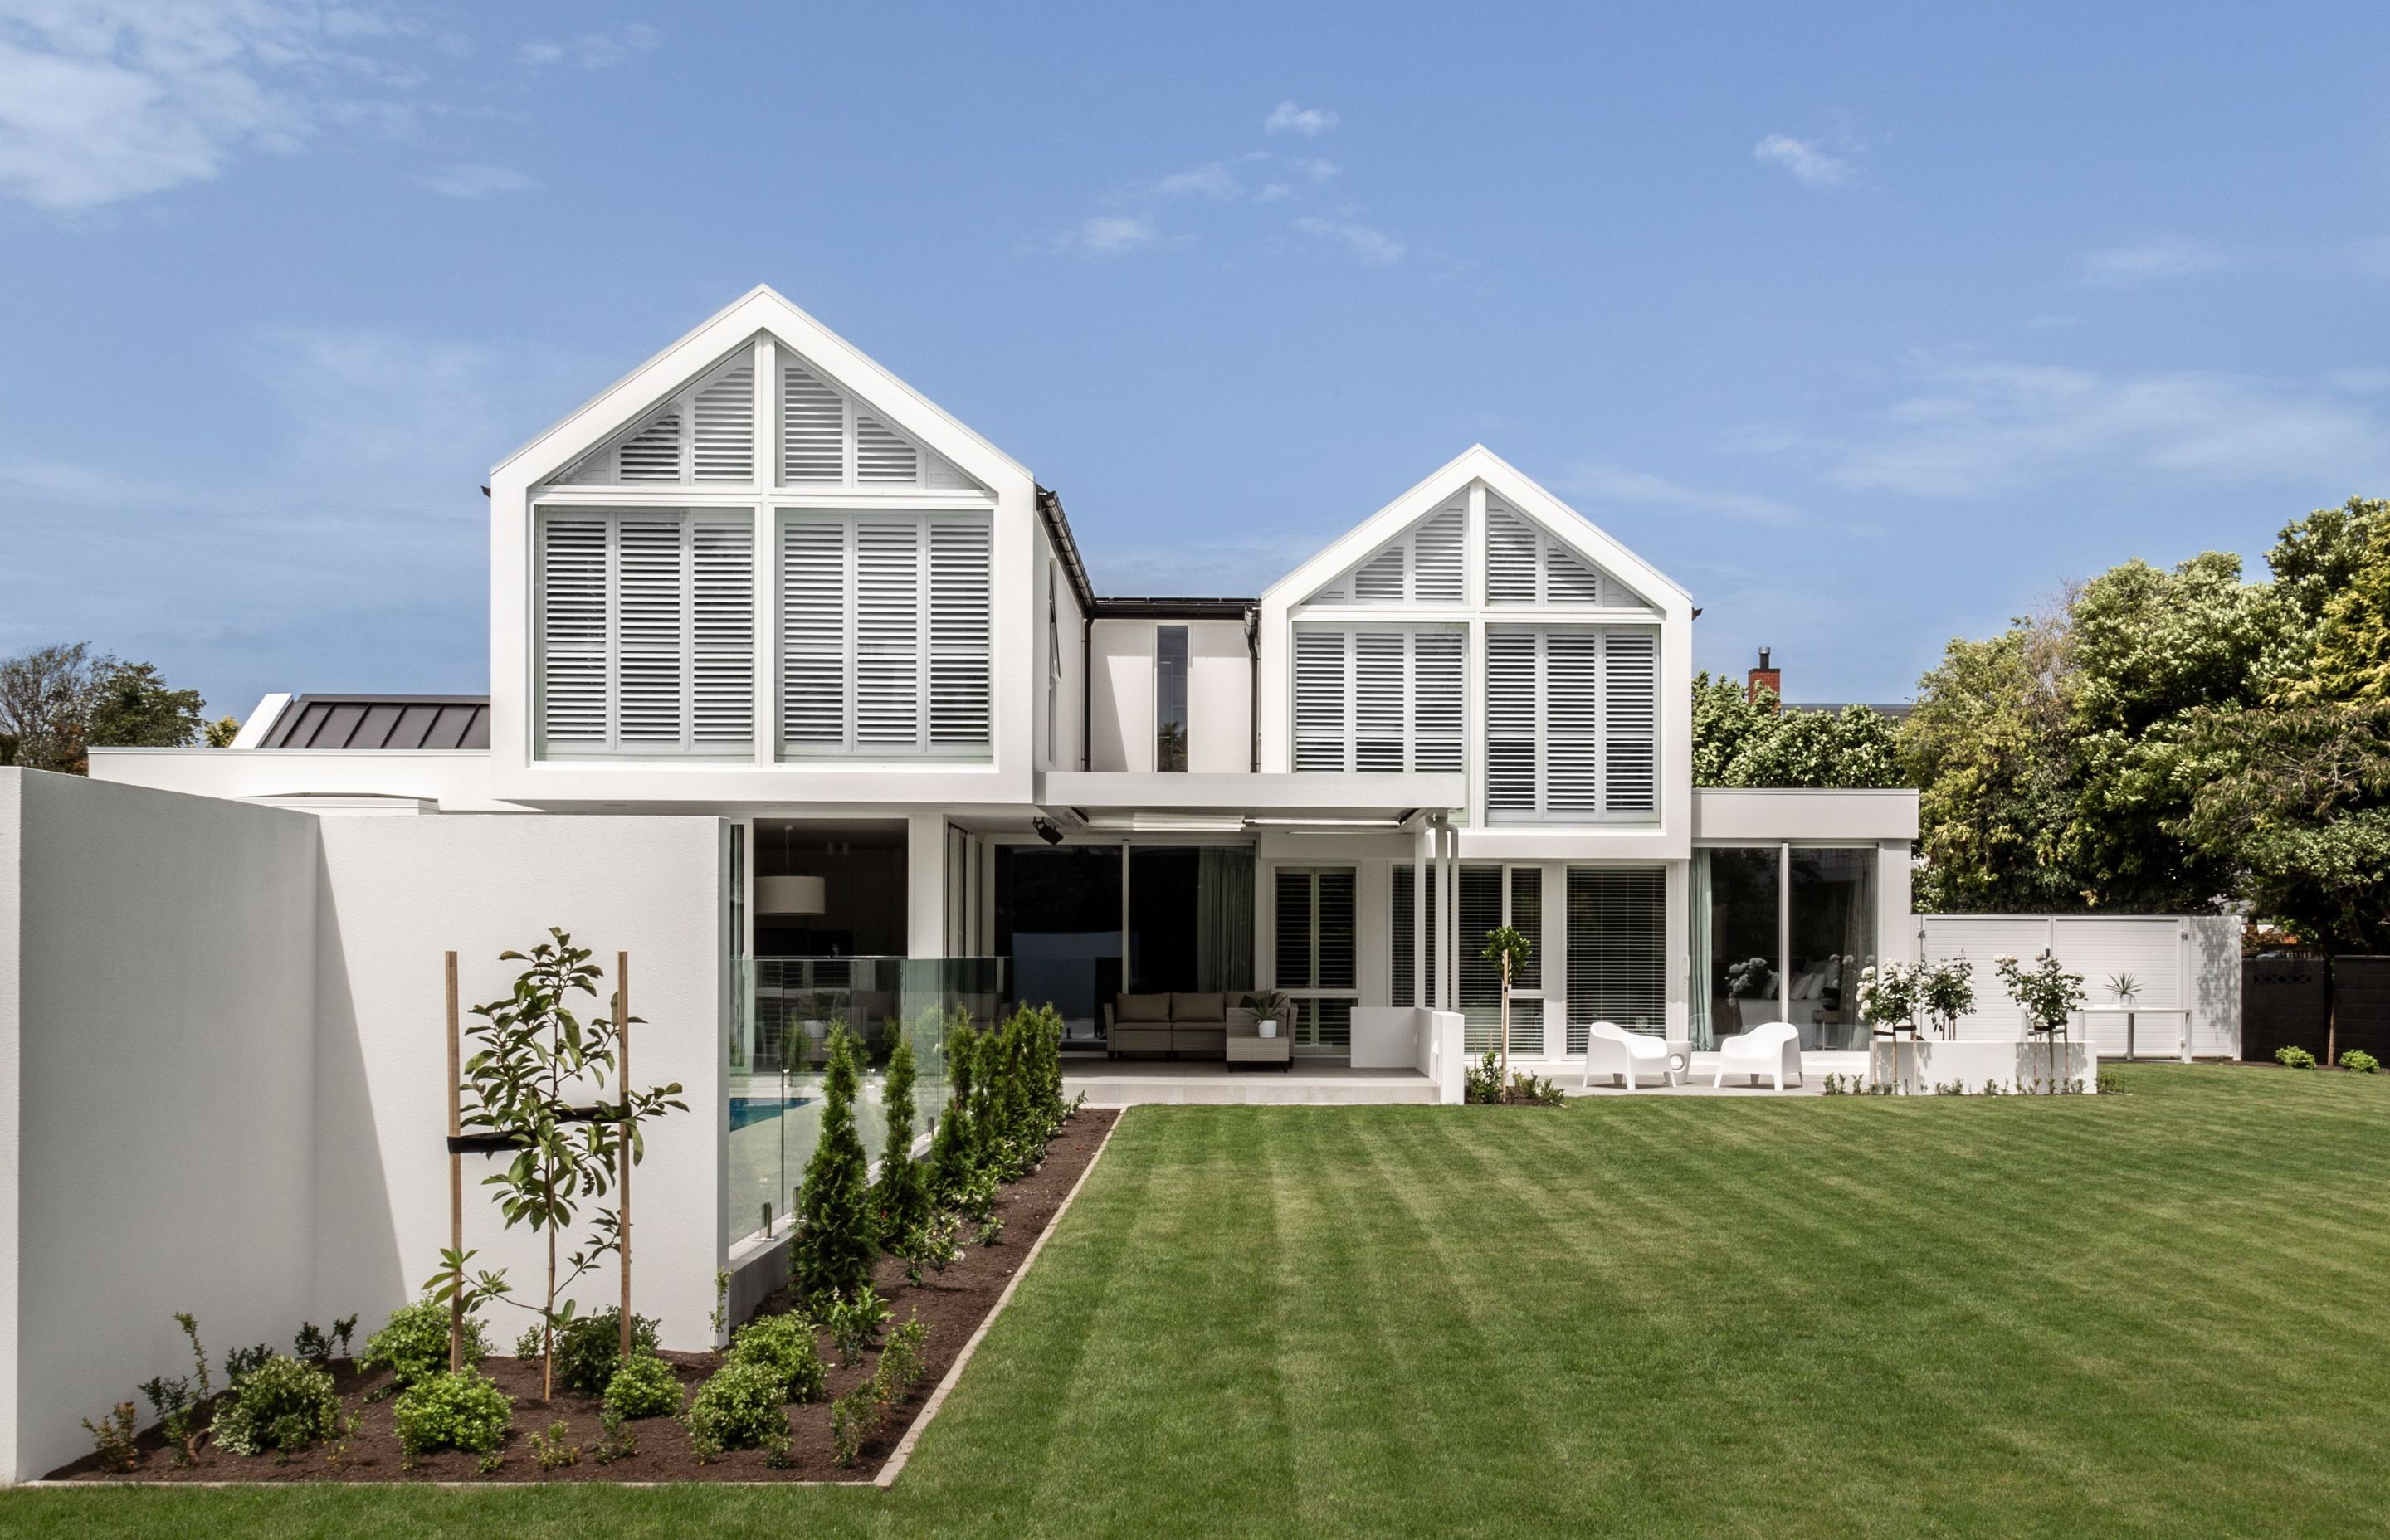 The elegant "white peaks" of the sculptural home run right from front to back.